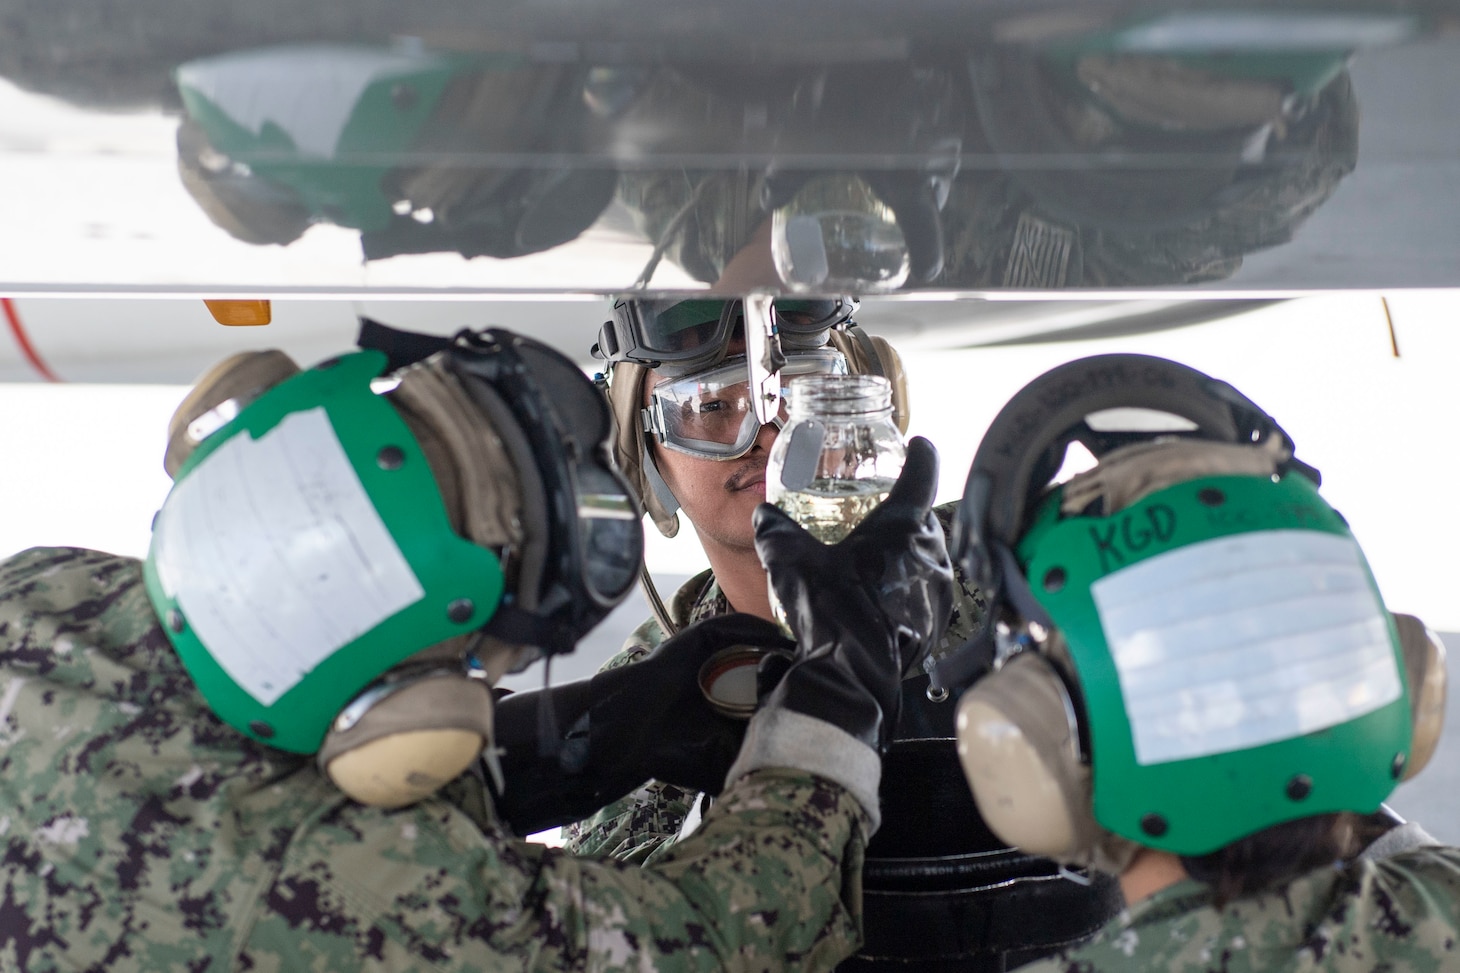 Sailors assigned to the maintenance department of the "Conquistadors" of Fleet Logistics Squadron (VR) 57 conduct training on fuel surveillance.